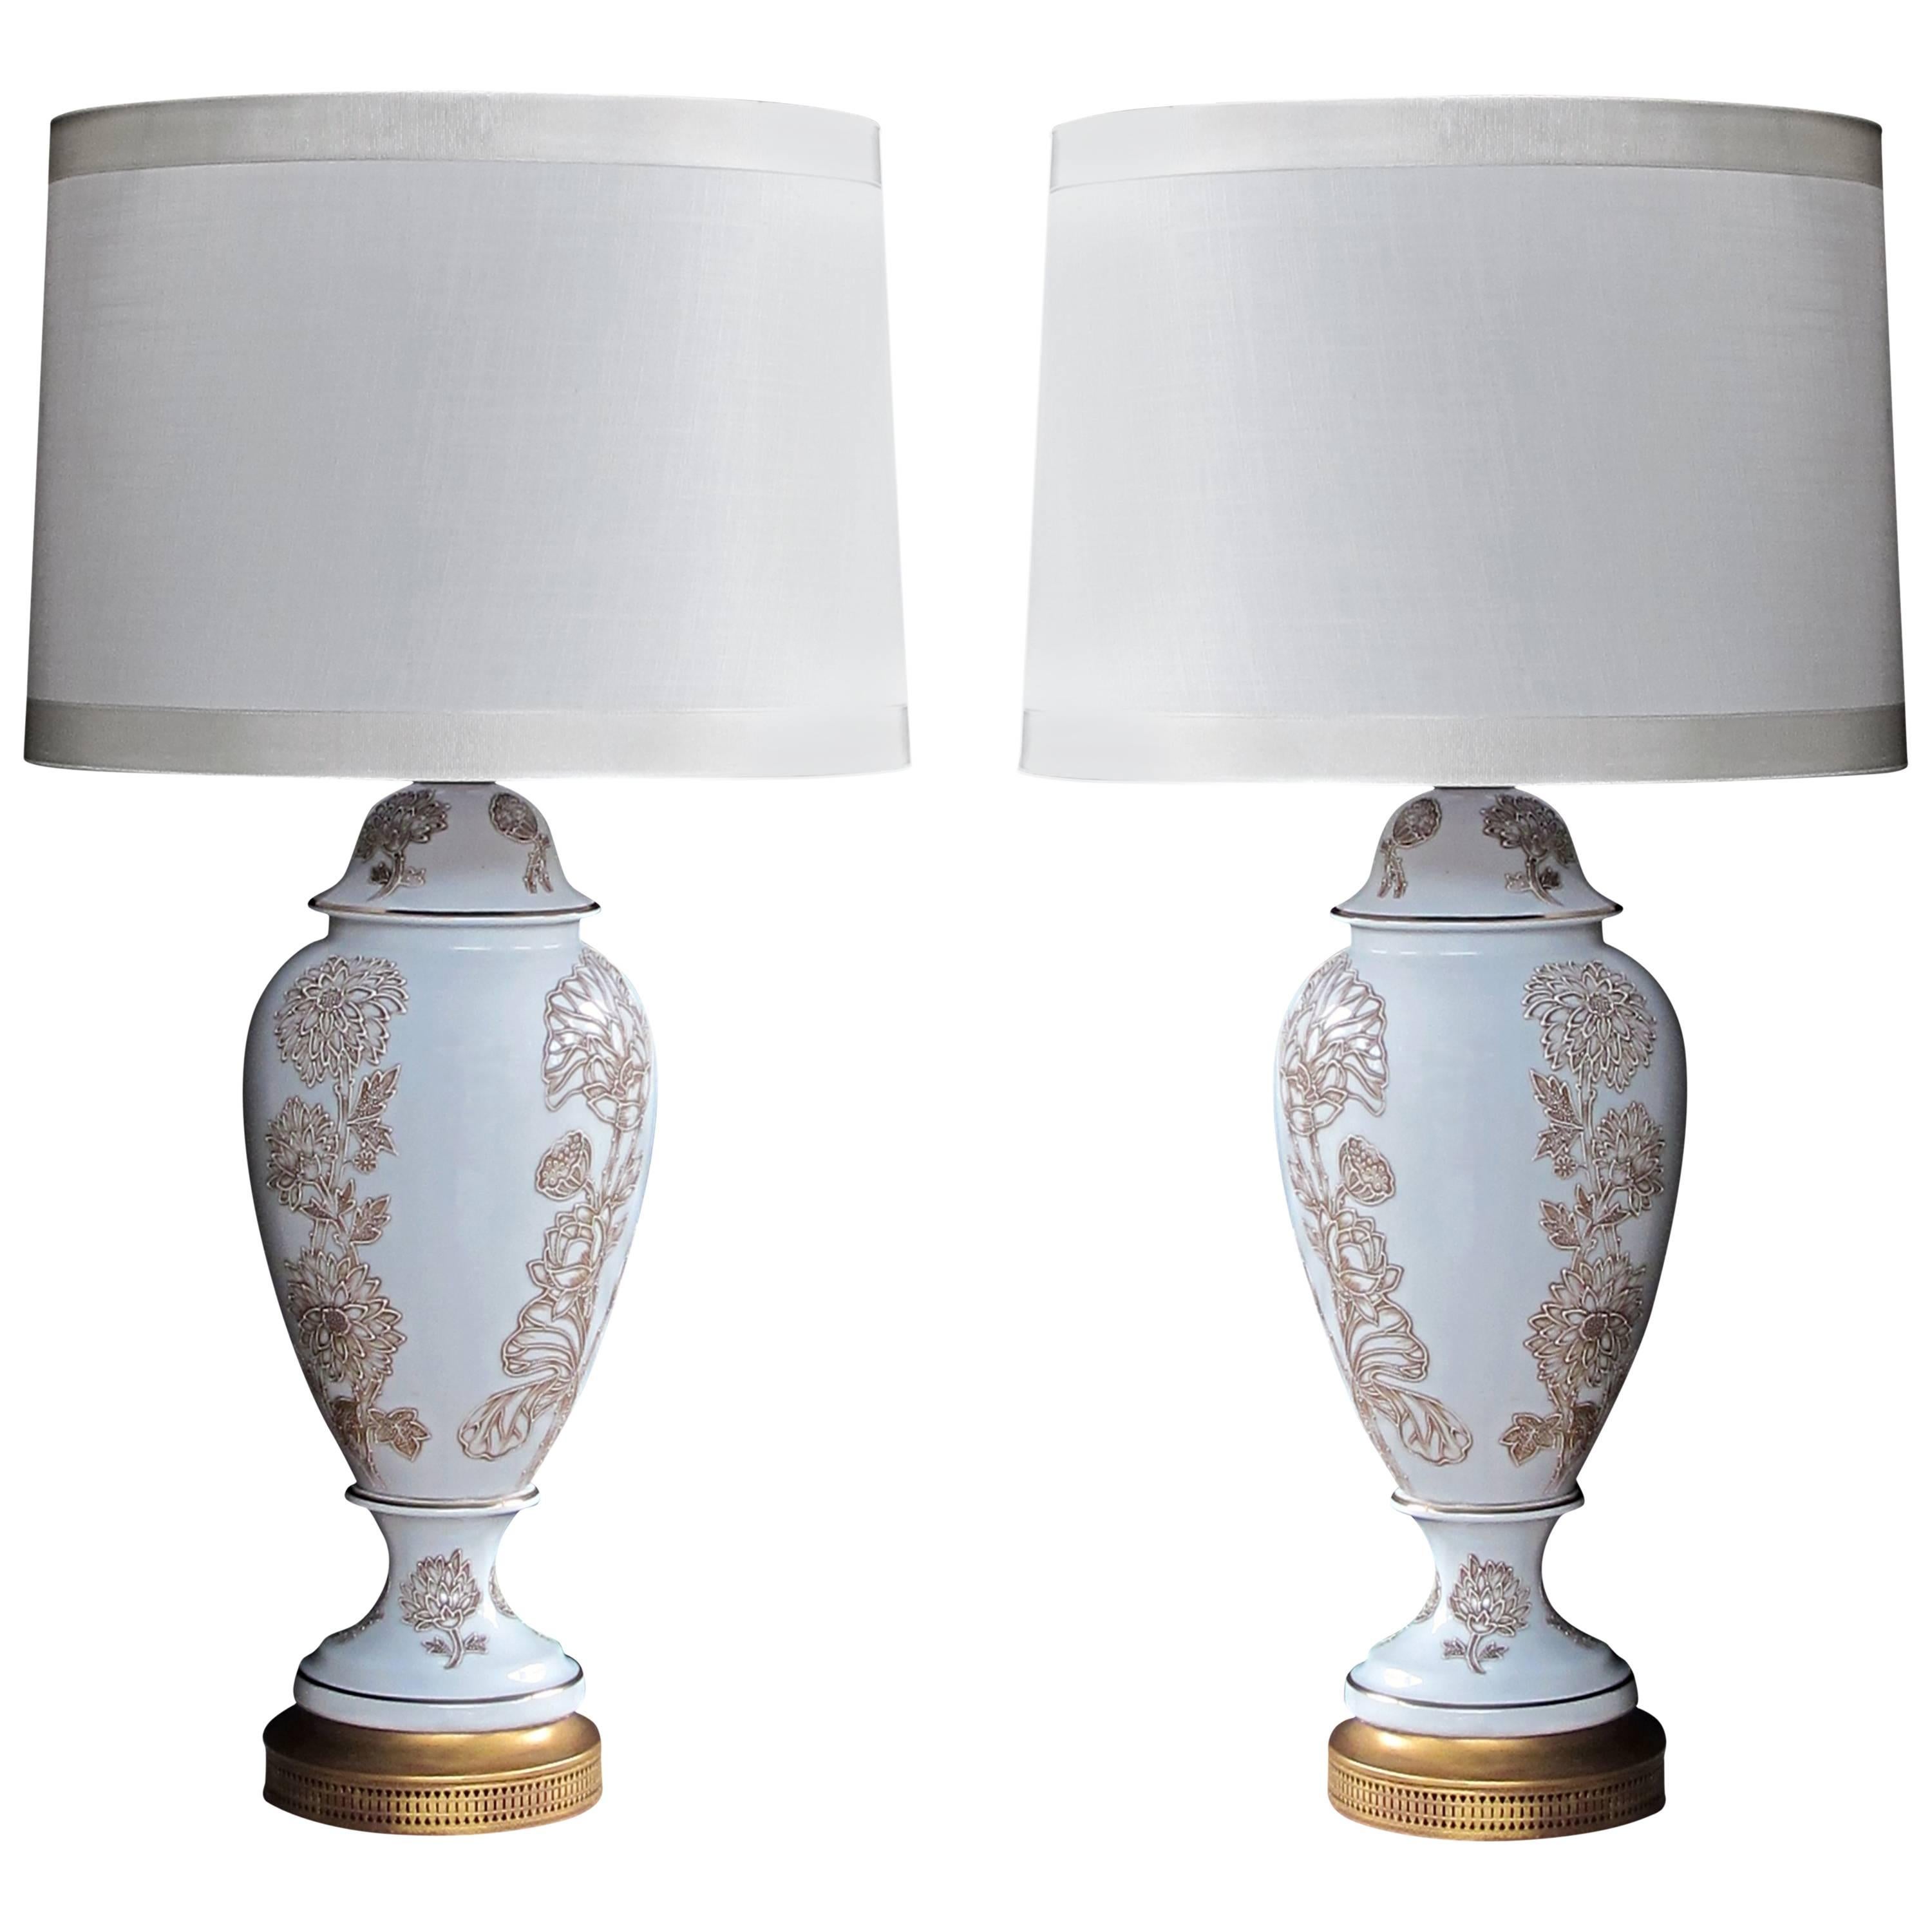 Pair of American Frederick Cooper Blanc de Chine Lamps with Raised Decoration